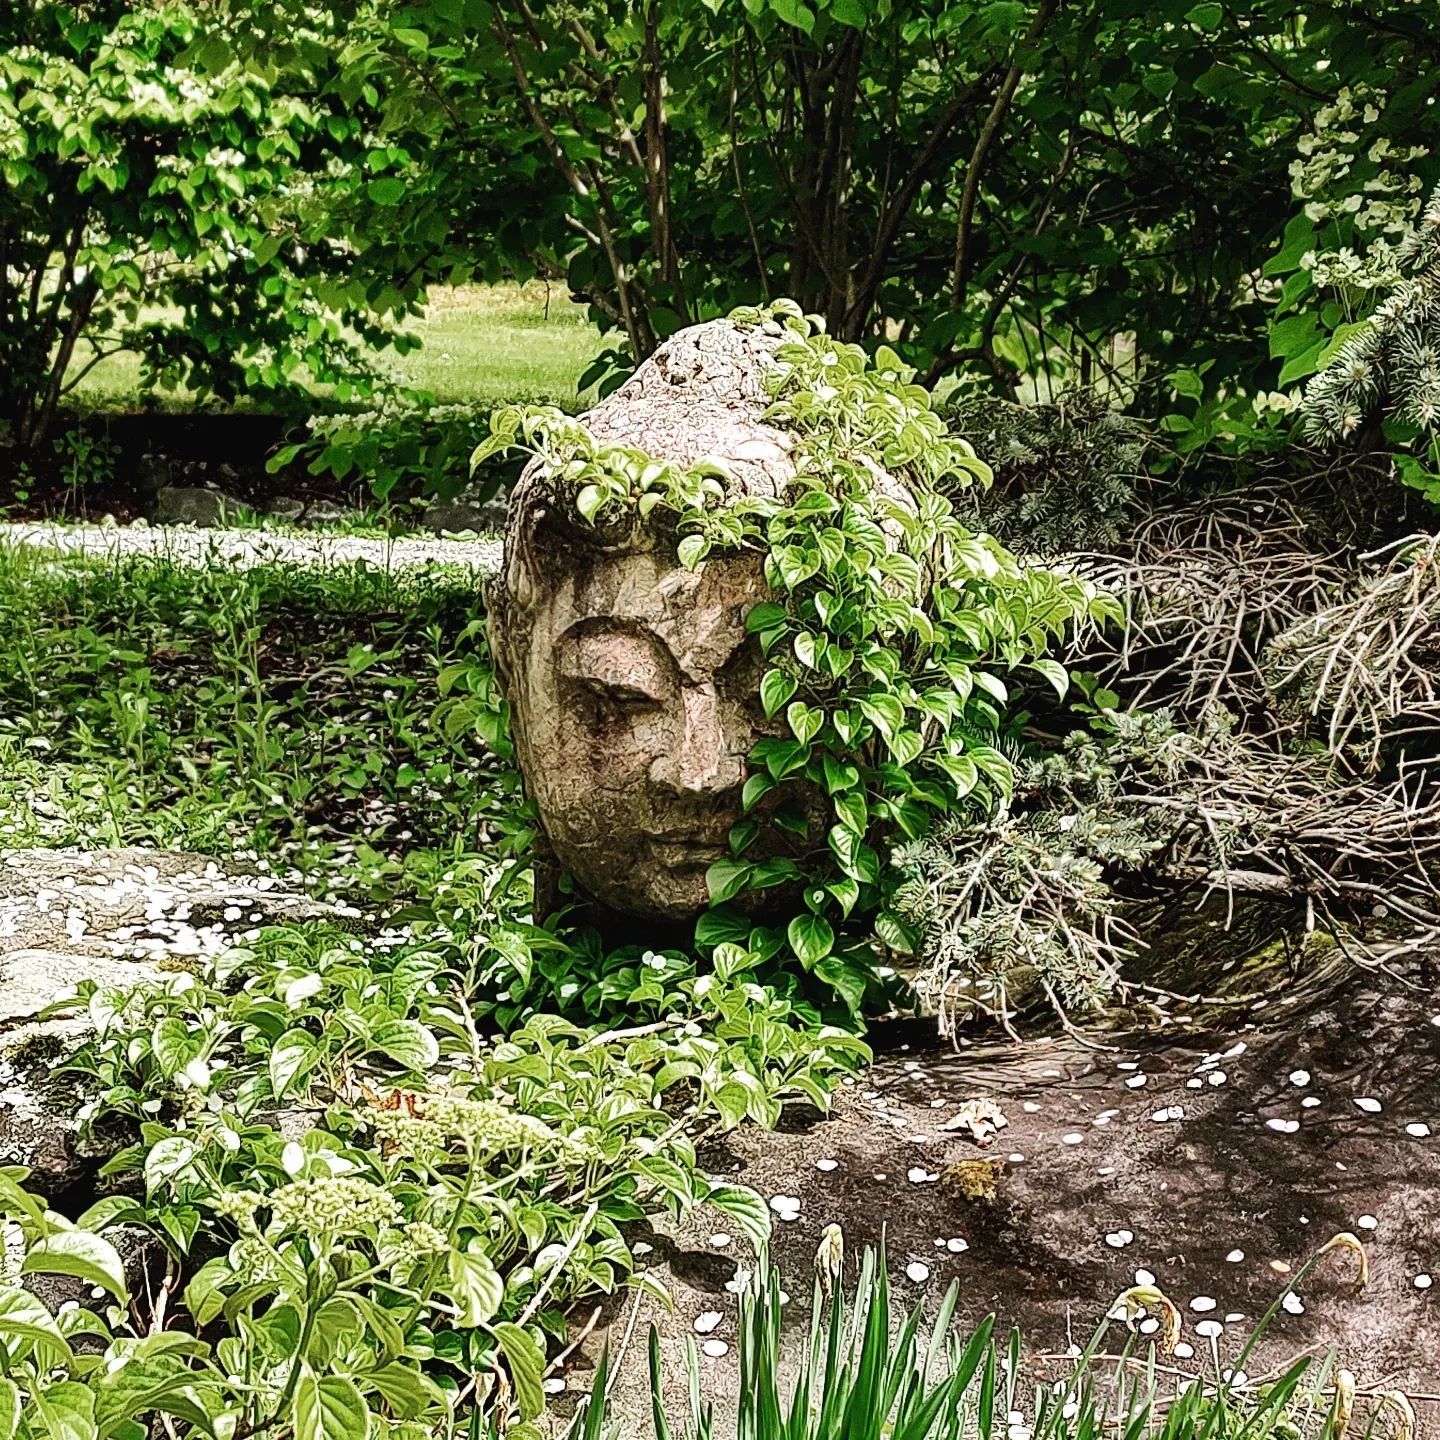 We finally found another of these vintage stone Buddha Heads.  Very large 2'tall, super heavy, so it won't blow away.  This one pictured was installed about three years ago and looks amazing in the garden where it now lives!  #buddha #vintage #hardto